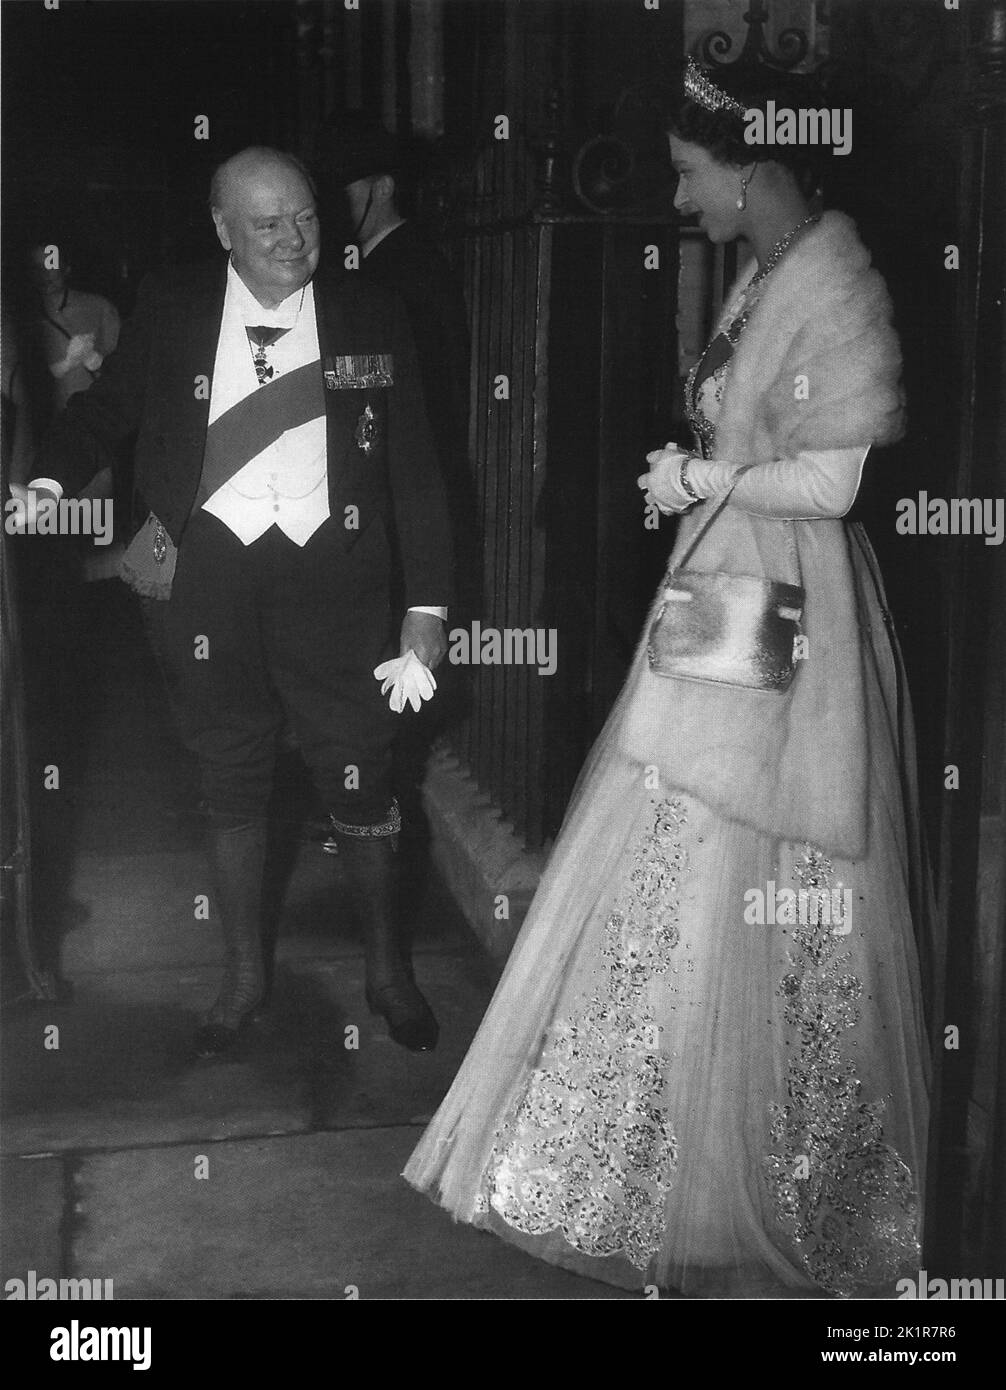 Winston Churchill greeting HM Queen Elizabeth ll at 10 Downing Street on the occasion of his retirement party. 1955 Stock Photo